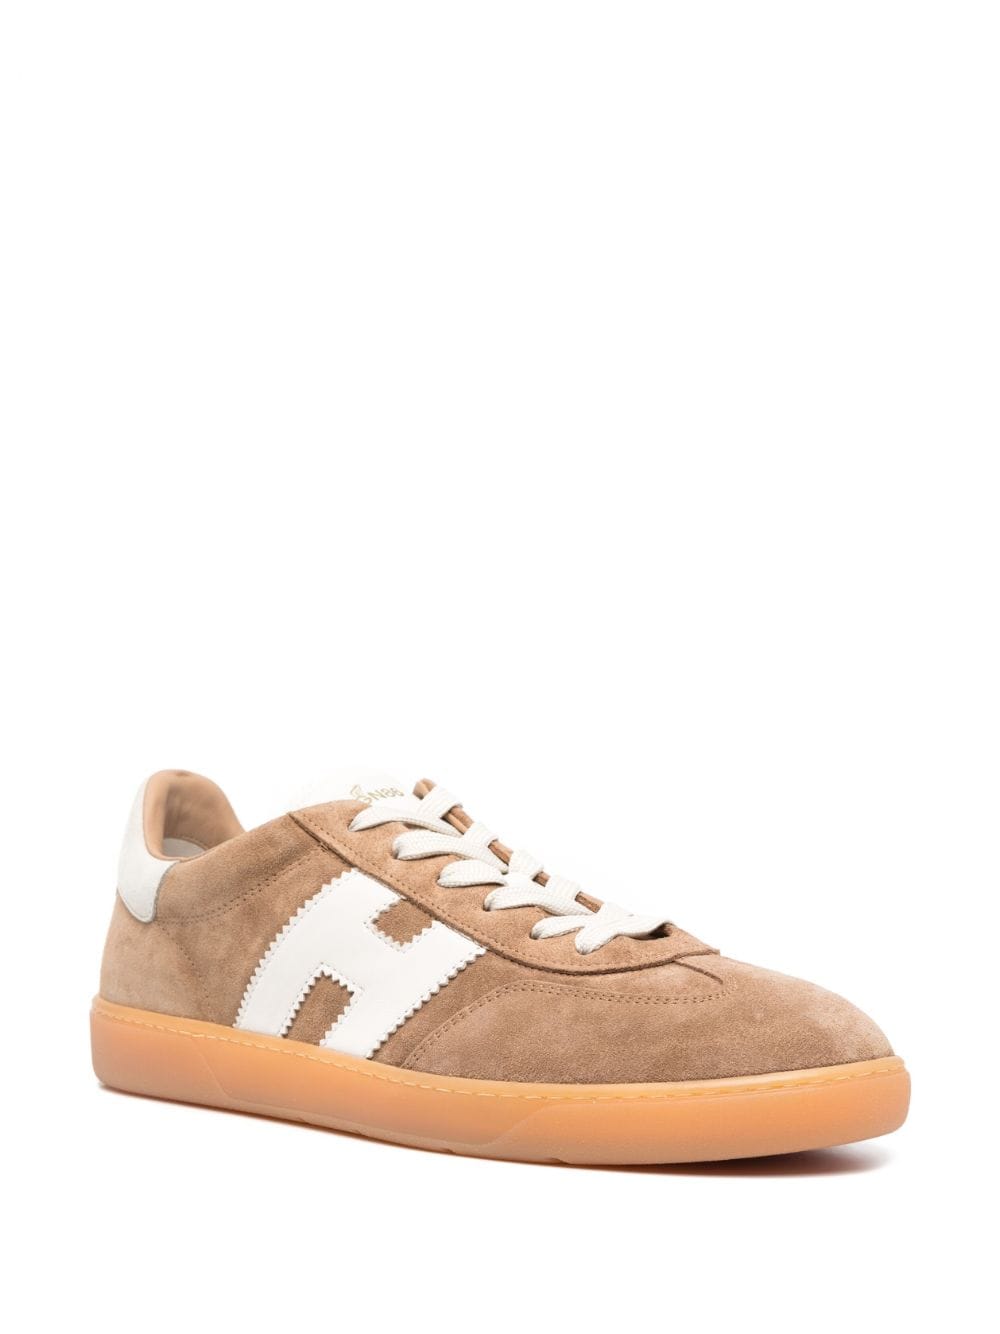 Shop Hogan H647 Sneakers In Cappuccino Ivory